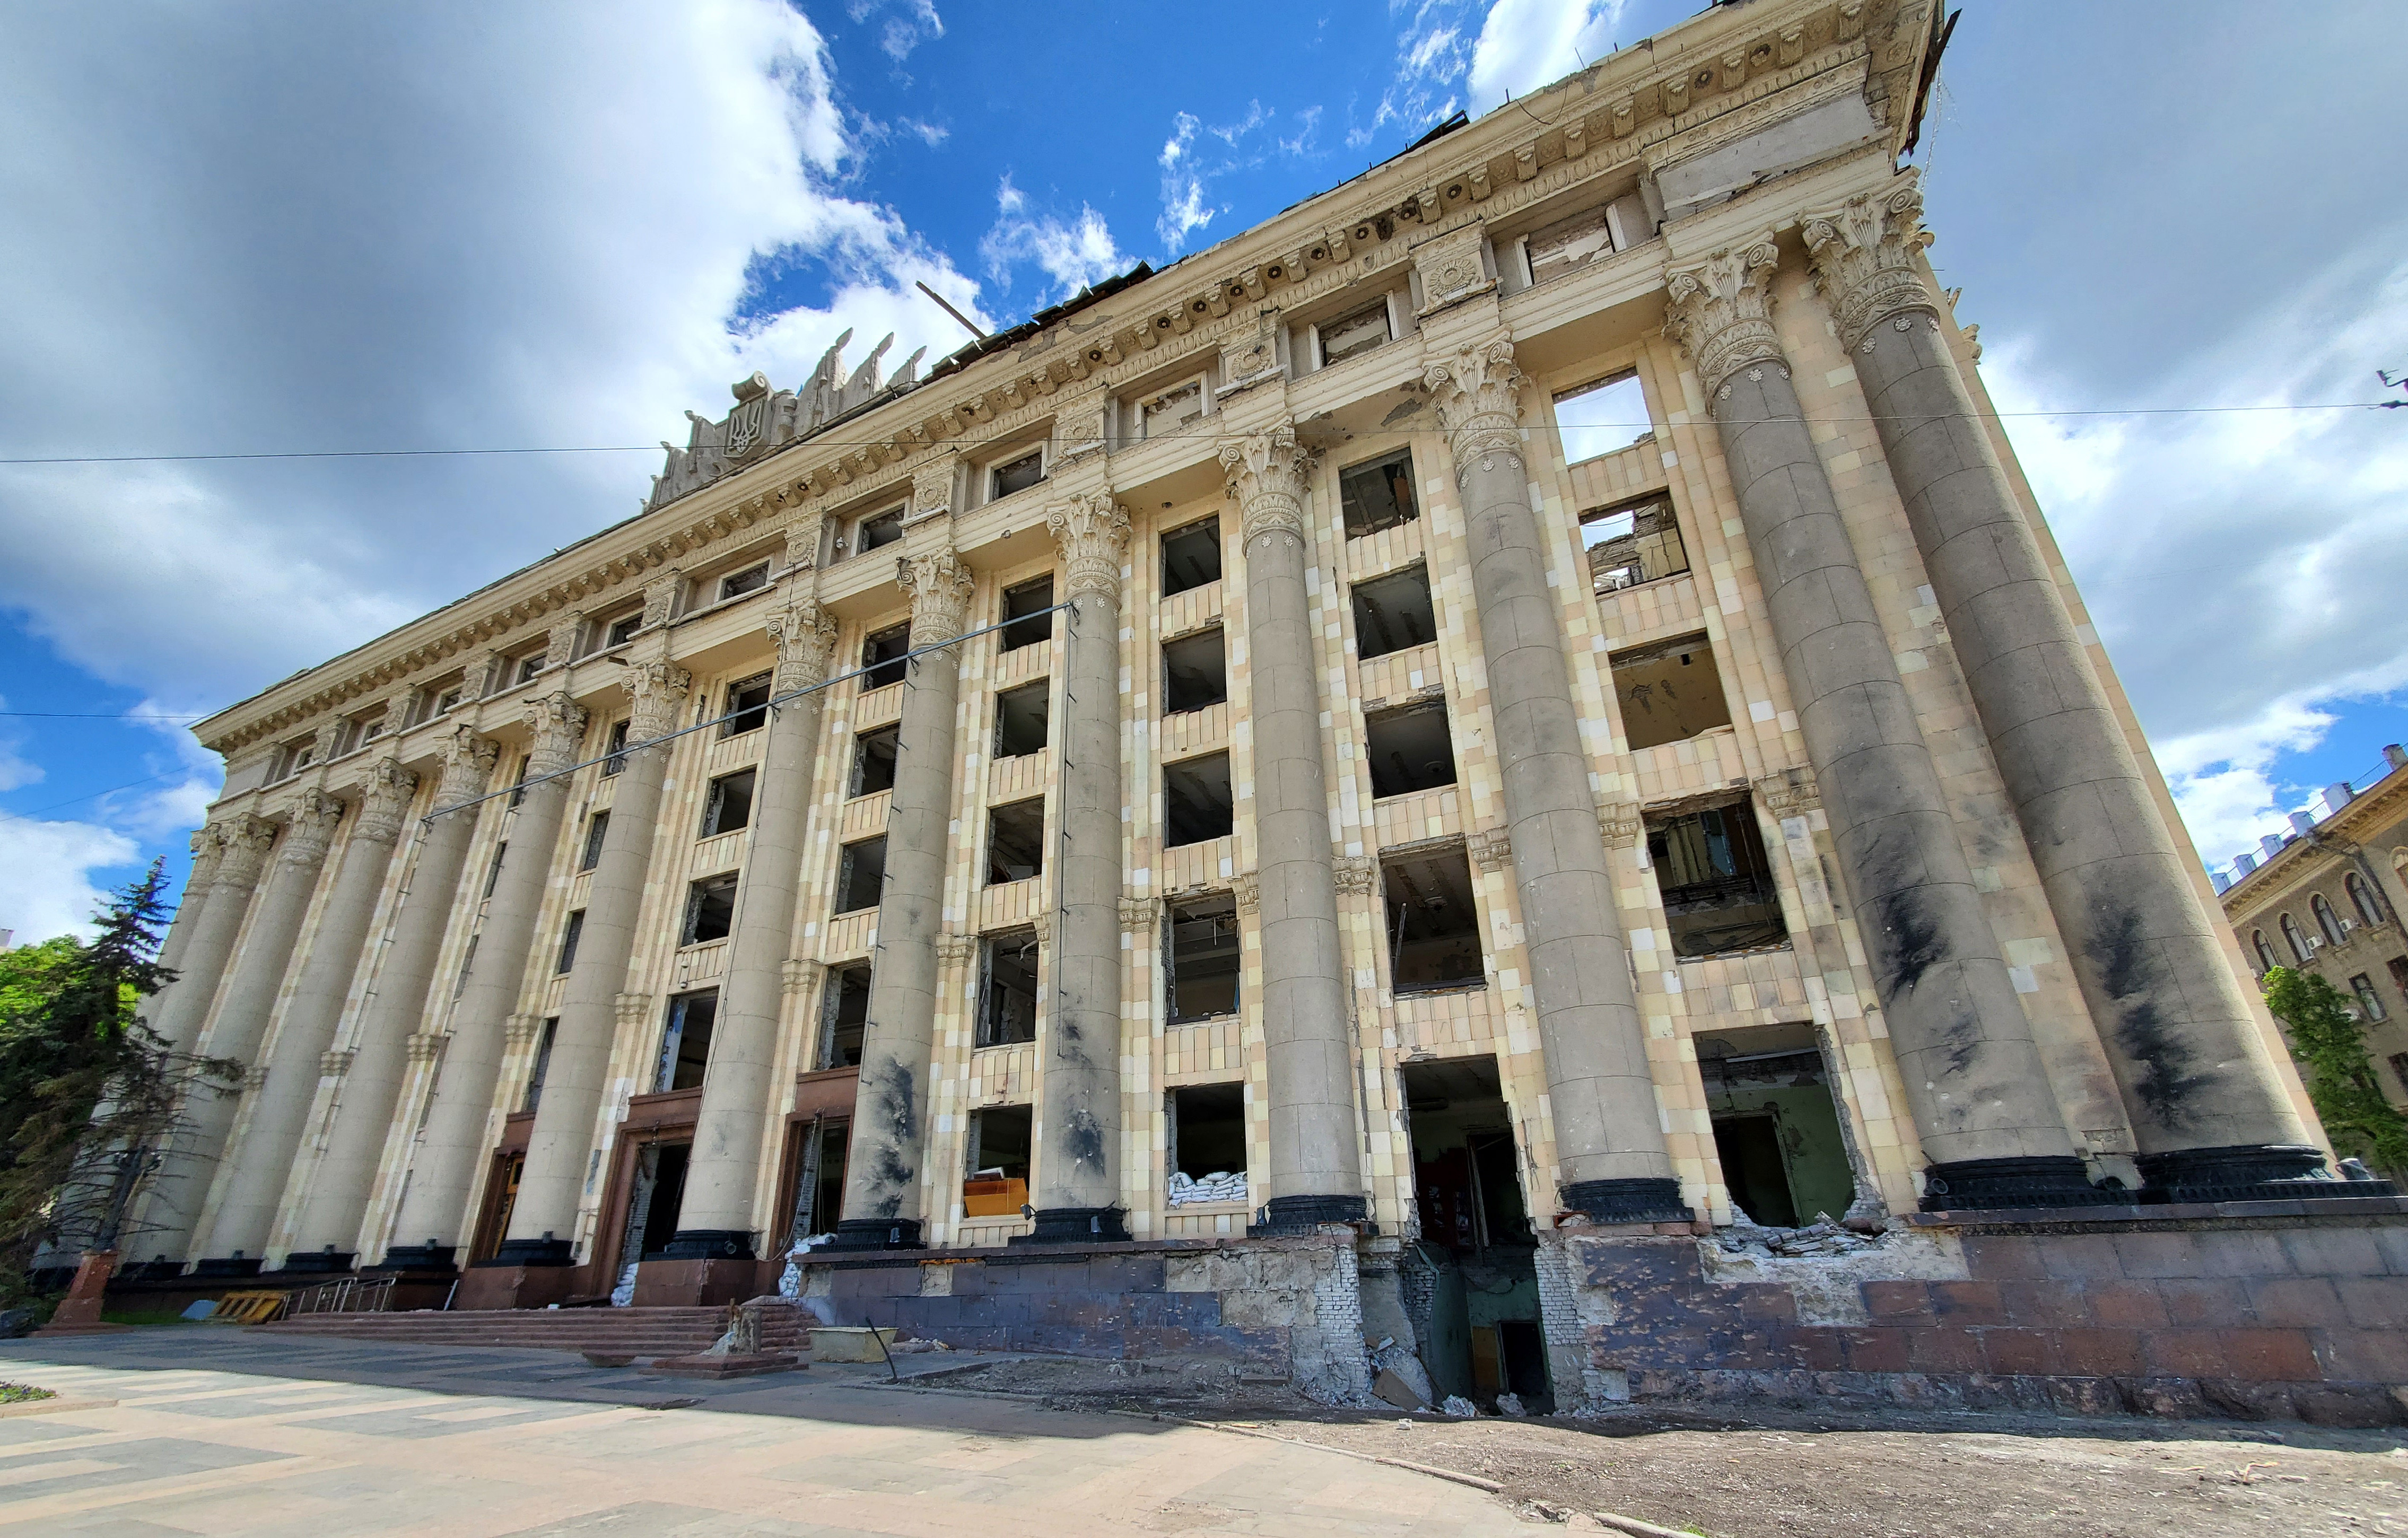 The exterior of a bombed administration building in Kharkiv